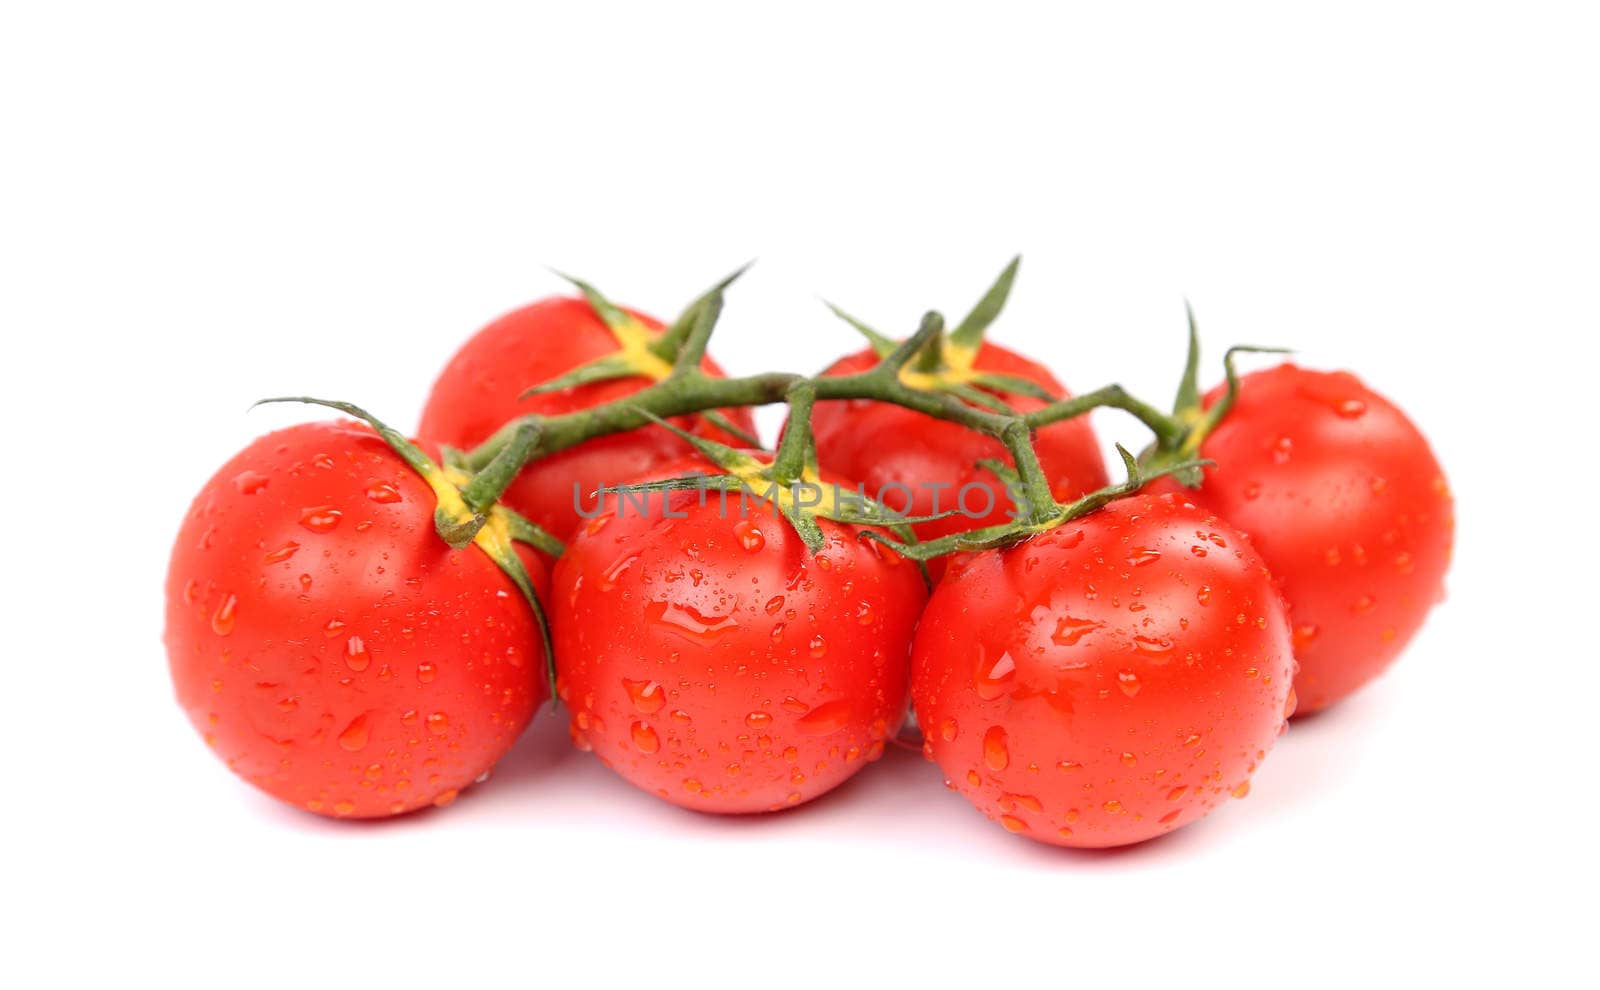 Cluster of Tomatoes are located on the white background